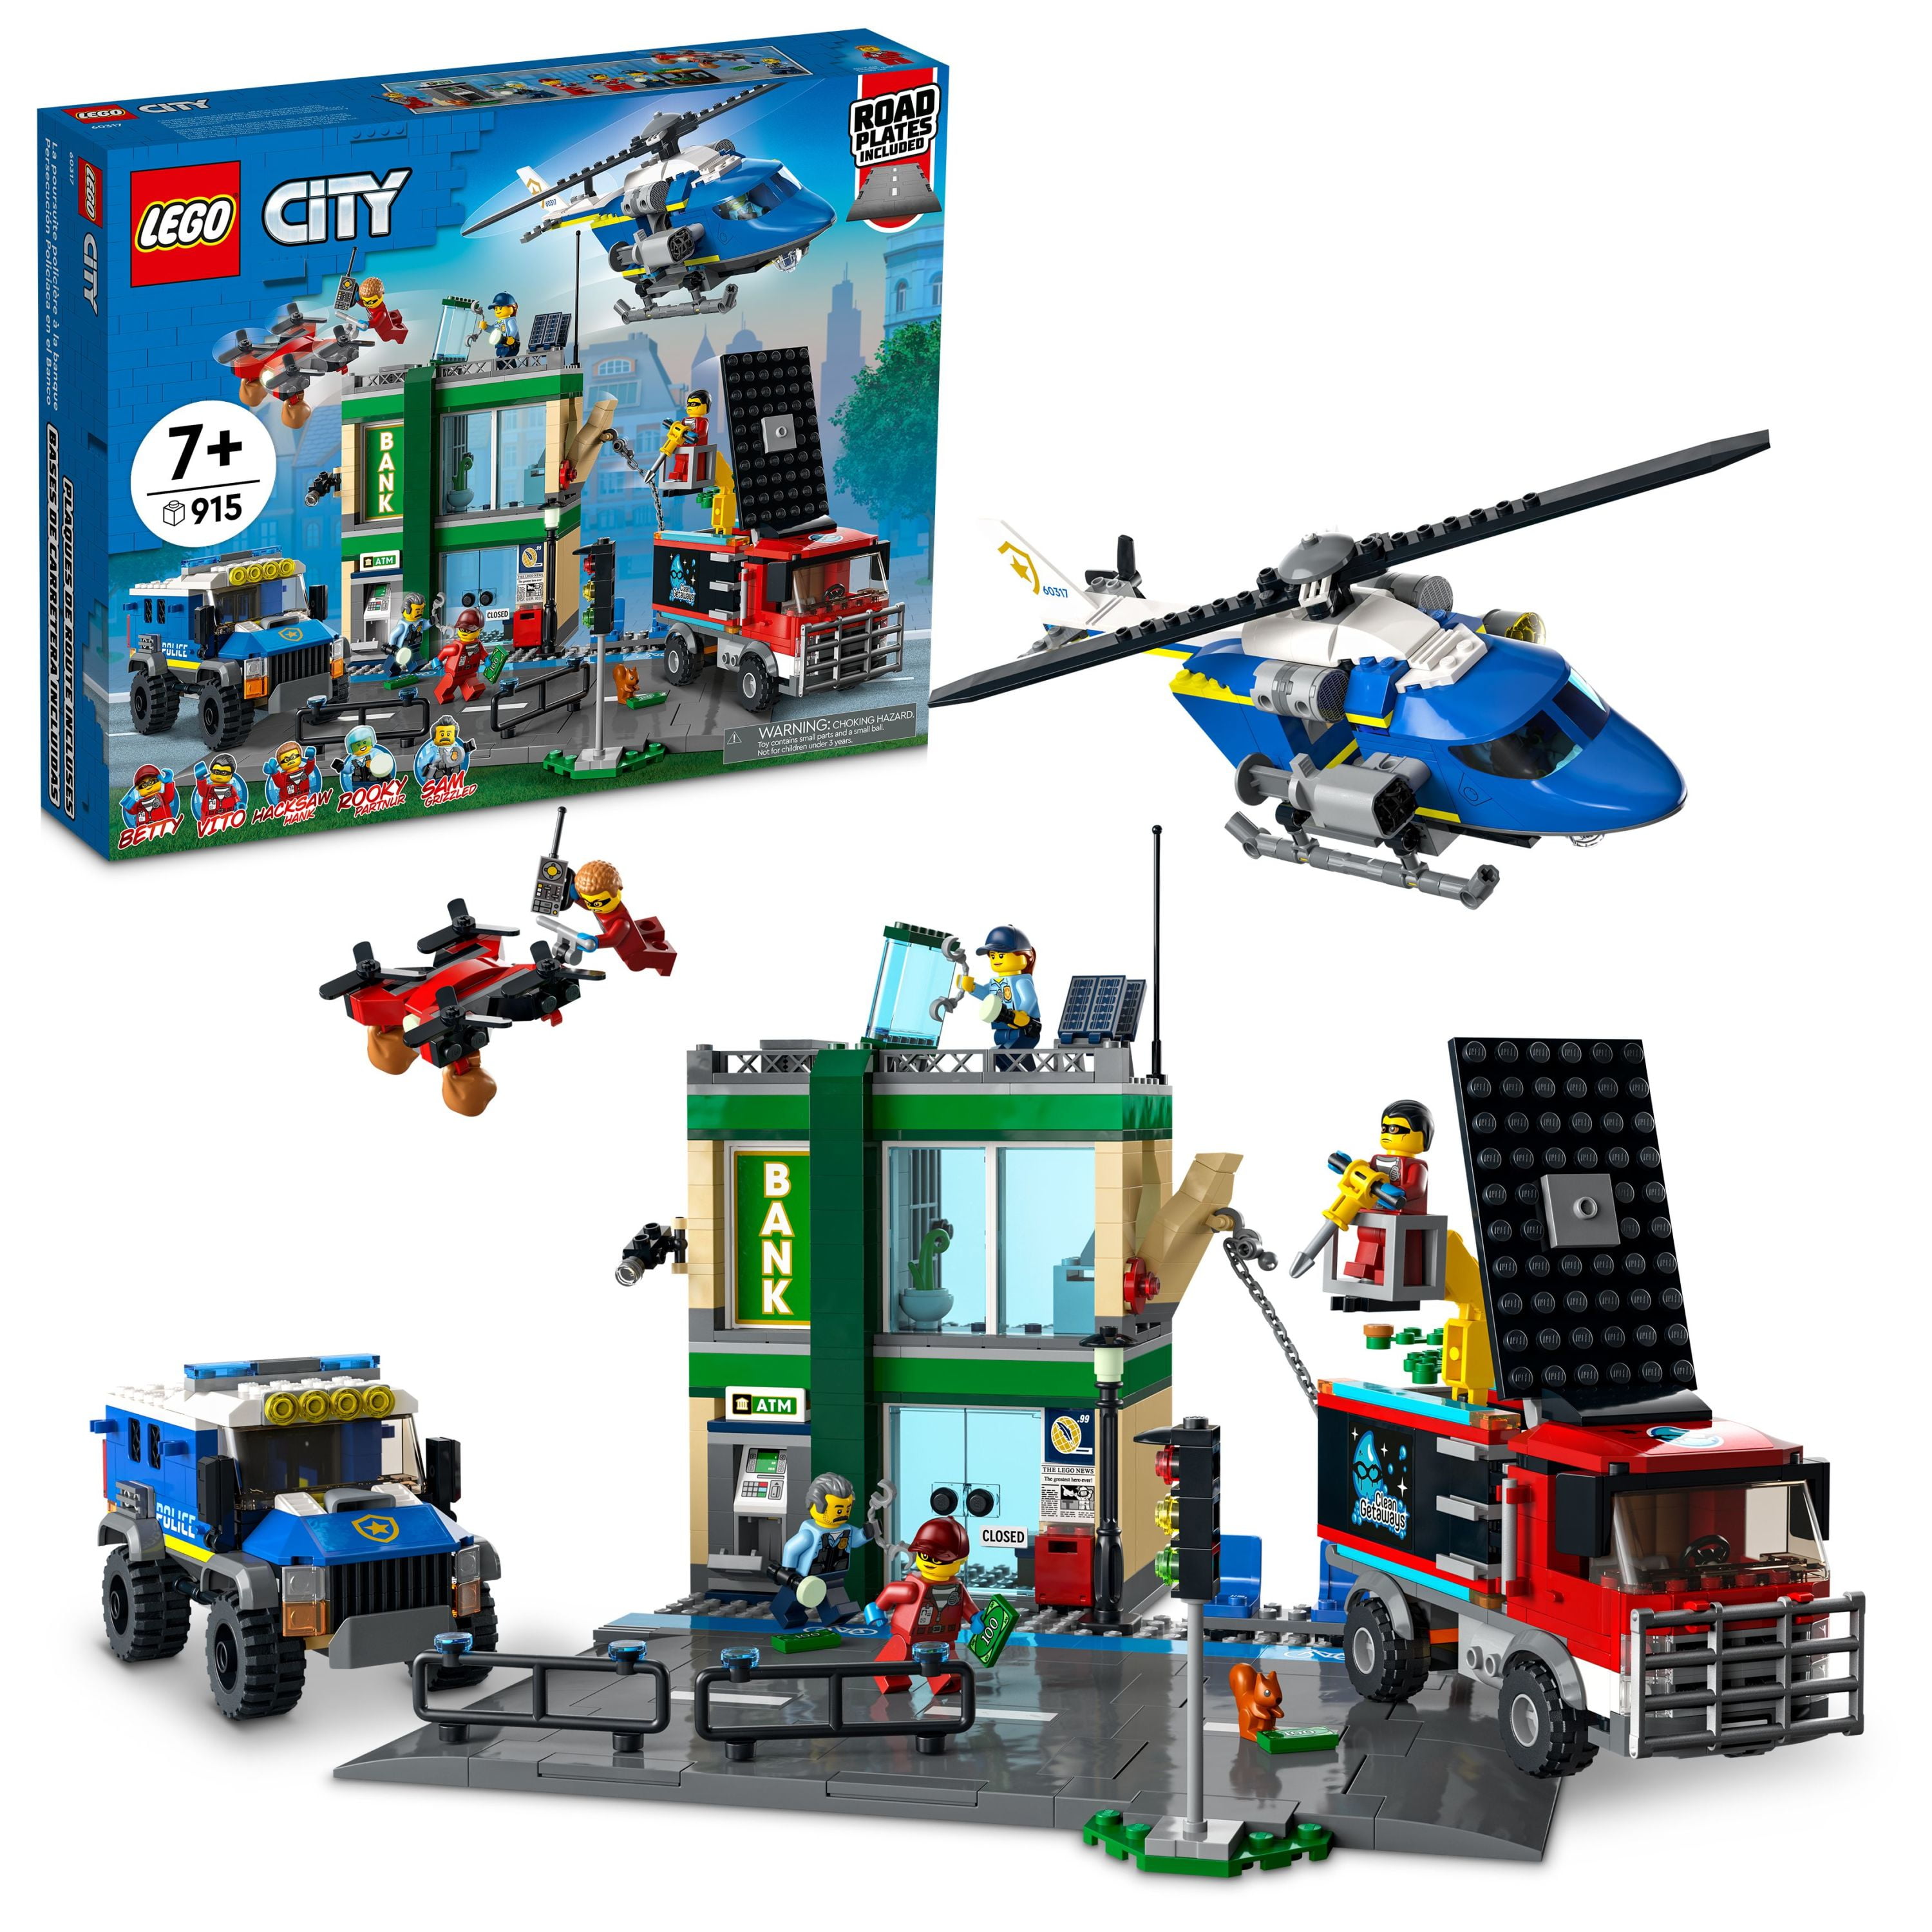 LEGO City Police Chase 60317 Bank with Helicopter, Drone and 2 Truck Toys for Kids 7 Plus Years Old, 2022 Series Building Sets -